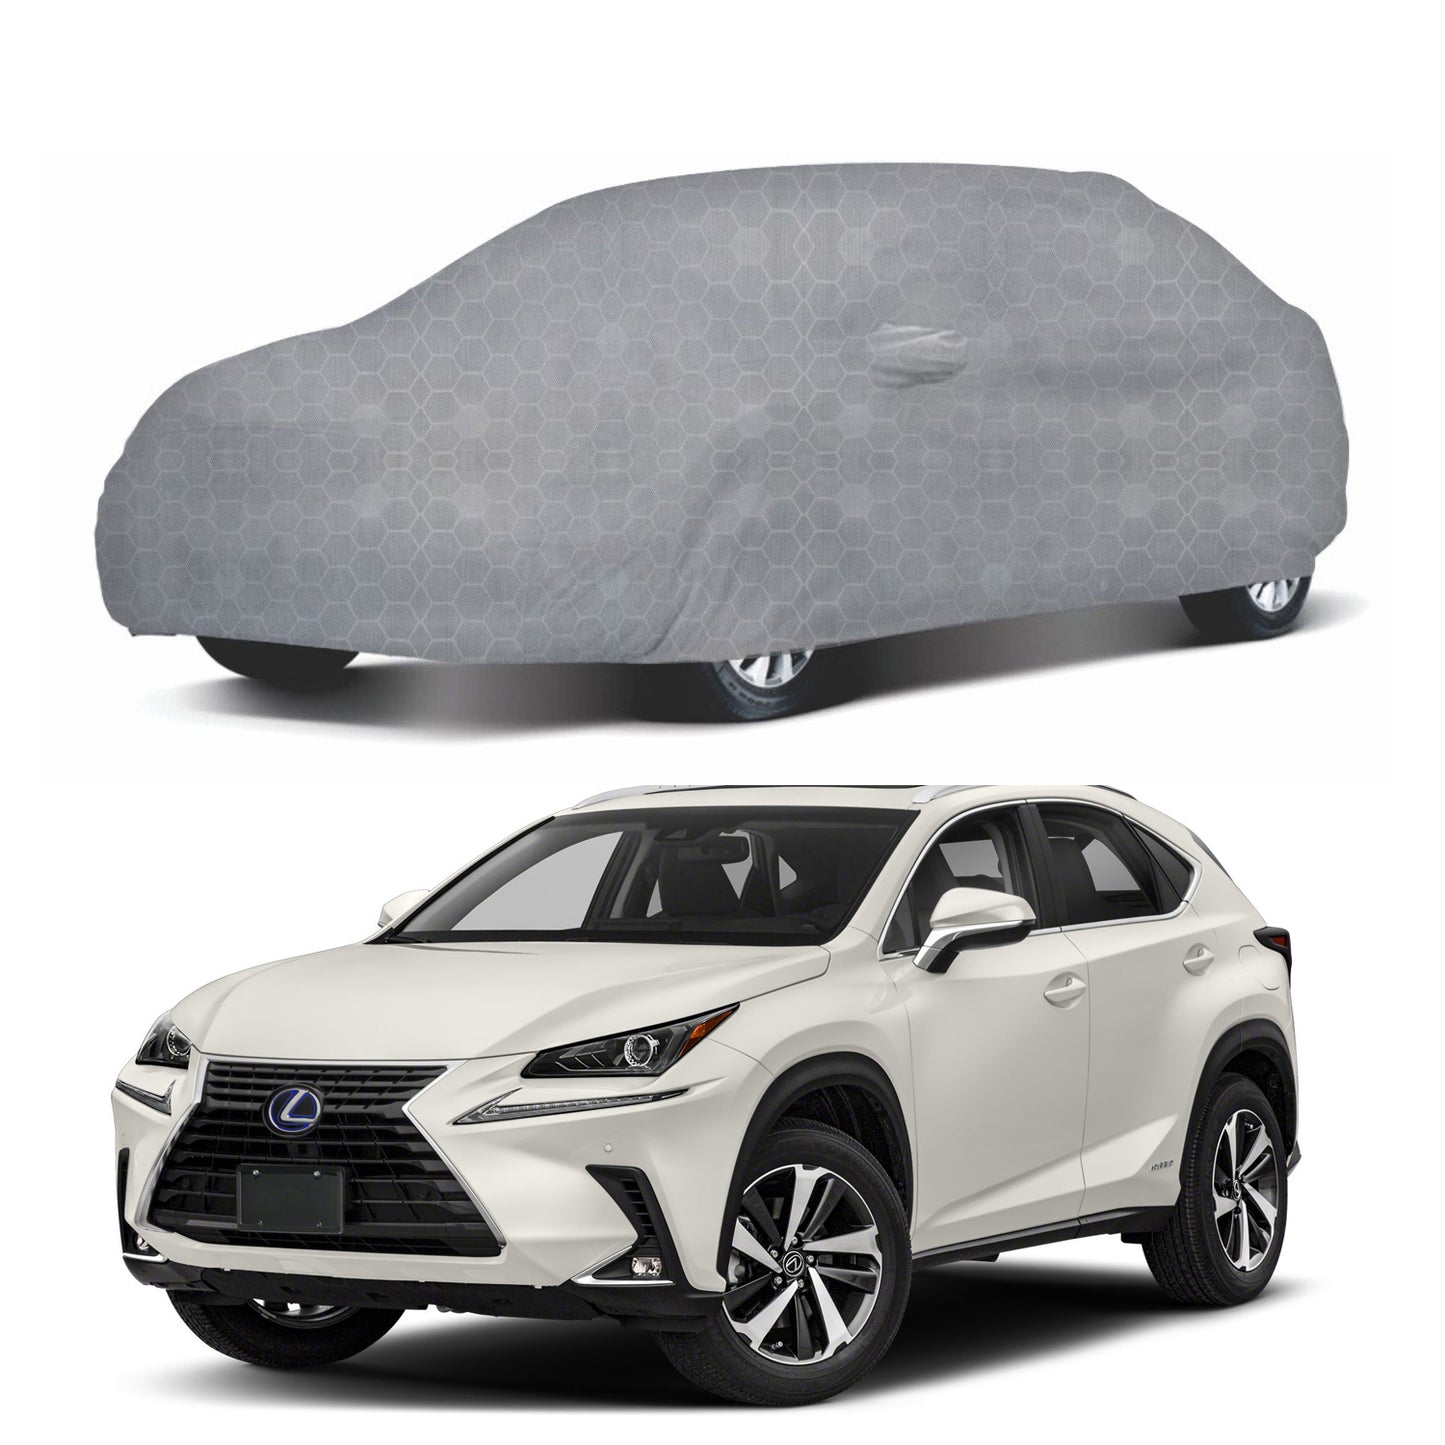 Oshotto 100% Dust Proof, Water Resistant Grey Car Body Cover with Mirror Pocket For Lexus NX